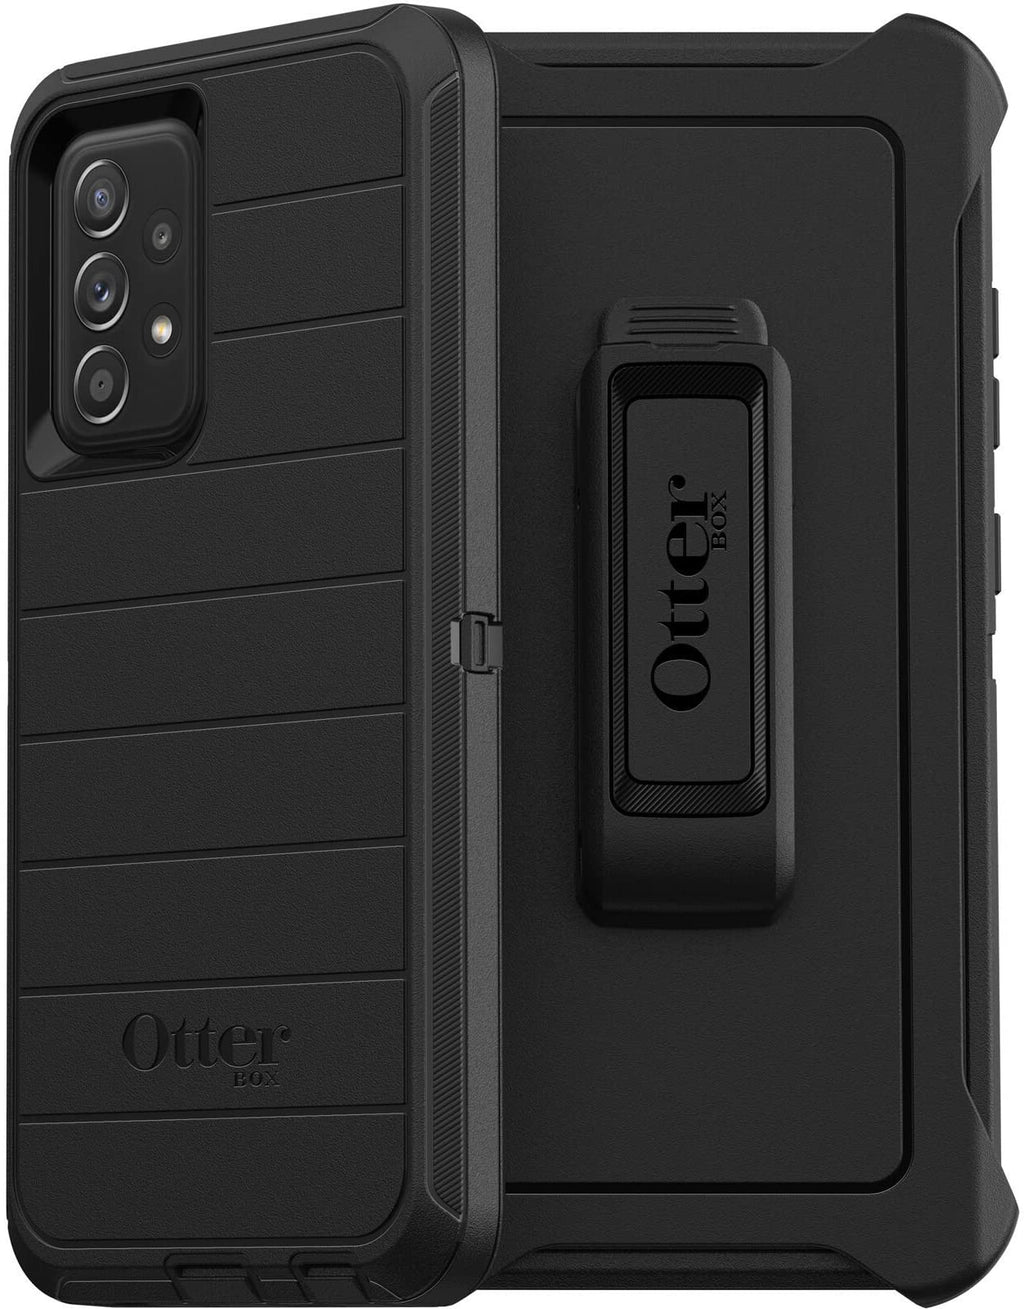  [AUSTRALIA] - OtterBox Defender Rugged Case for Samsung Galaxy A52 & Galaxy A52 5G (ONLY) Retail Packaging - Black - with Microbial Defense